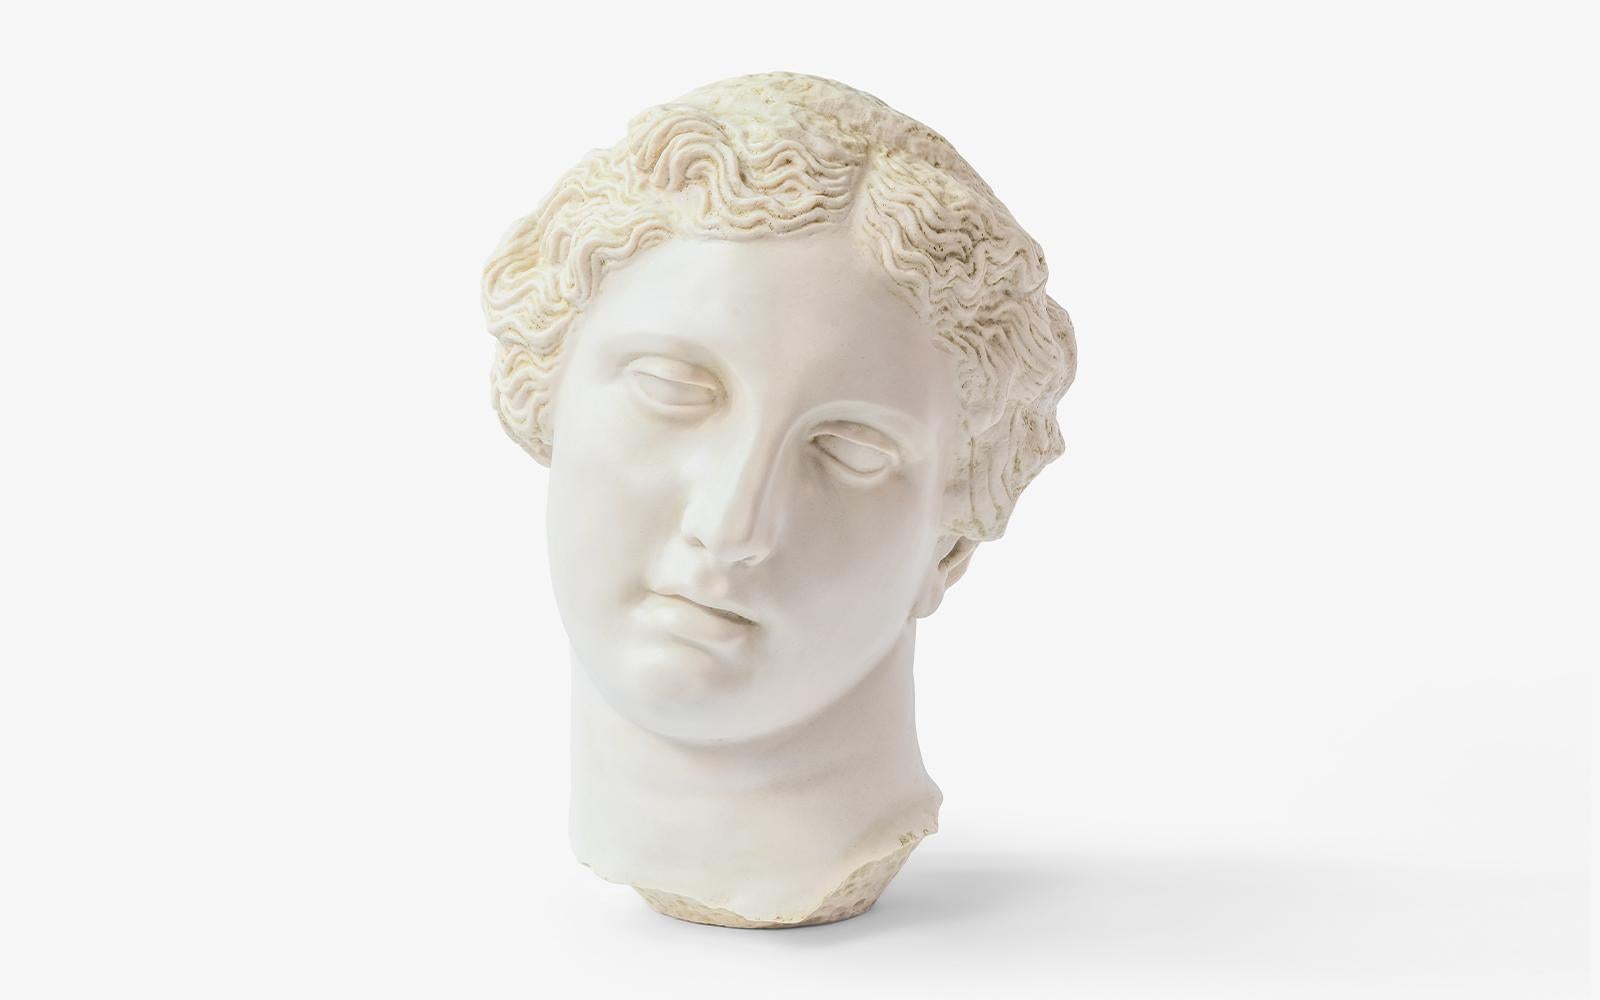 Apollon Bust sculpture by Lagu.
Designed by Ufuk Ceylan.
Dimensions: W 44 x D 35 x H 58 cm.
Materials: Statuary Marble, Cast.

Apollo is known as the god of music, art, the sun, fire and poetry in Greek mythology. He also possessed the ability